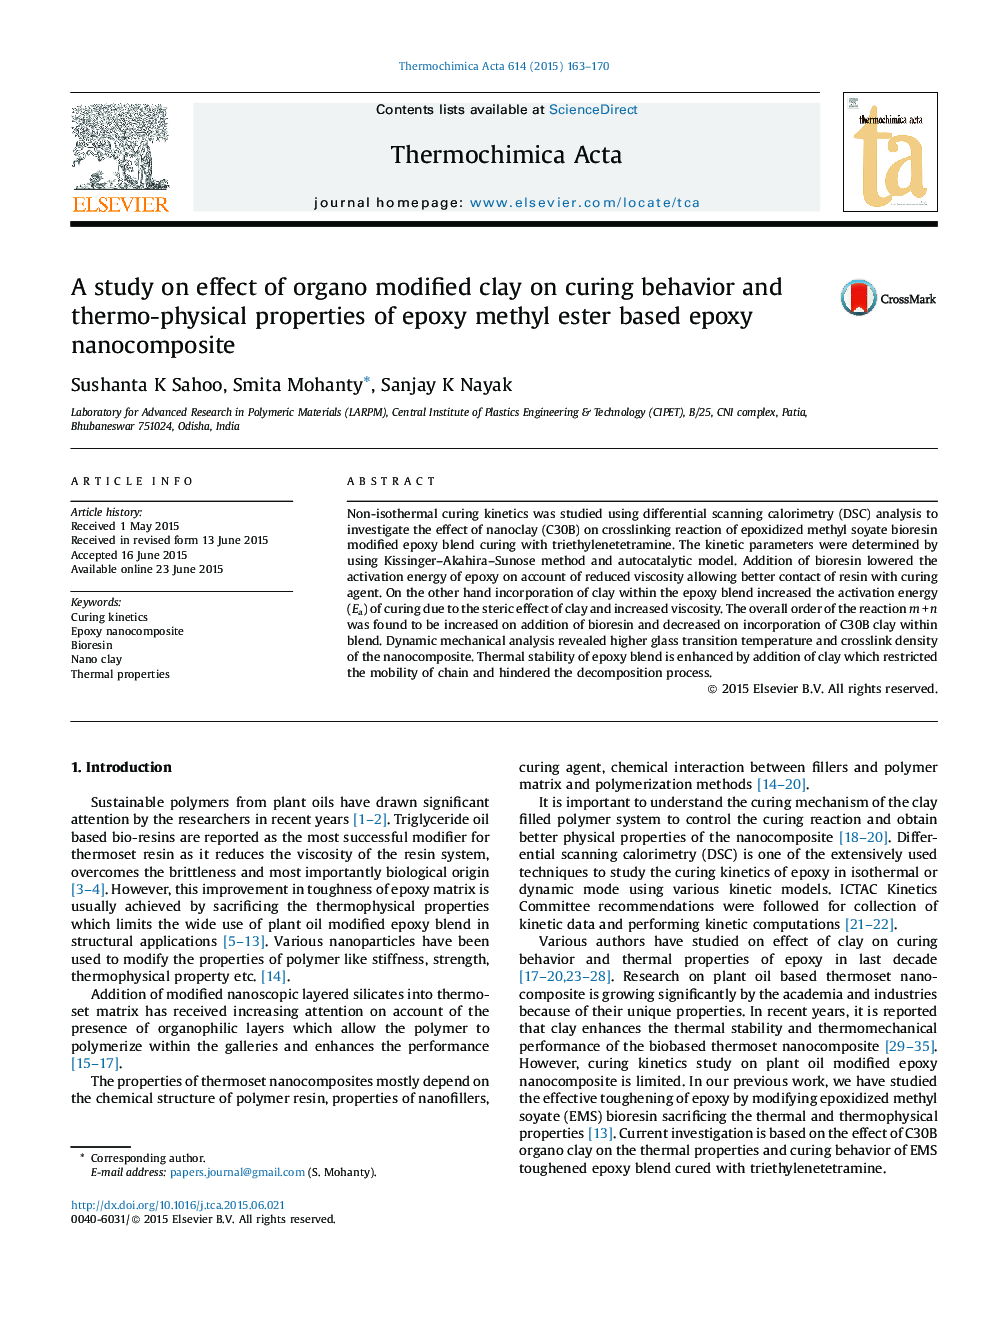 A study on effect of organo modified clay on curing behavior and thermo-physical properties of epoxy methyl ester based epoxy nanocomposite